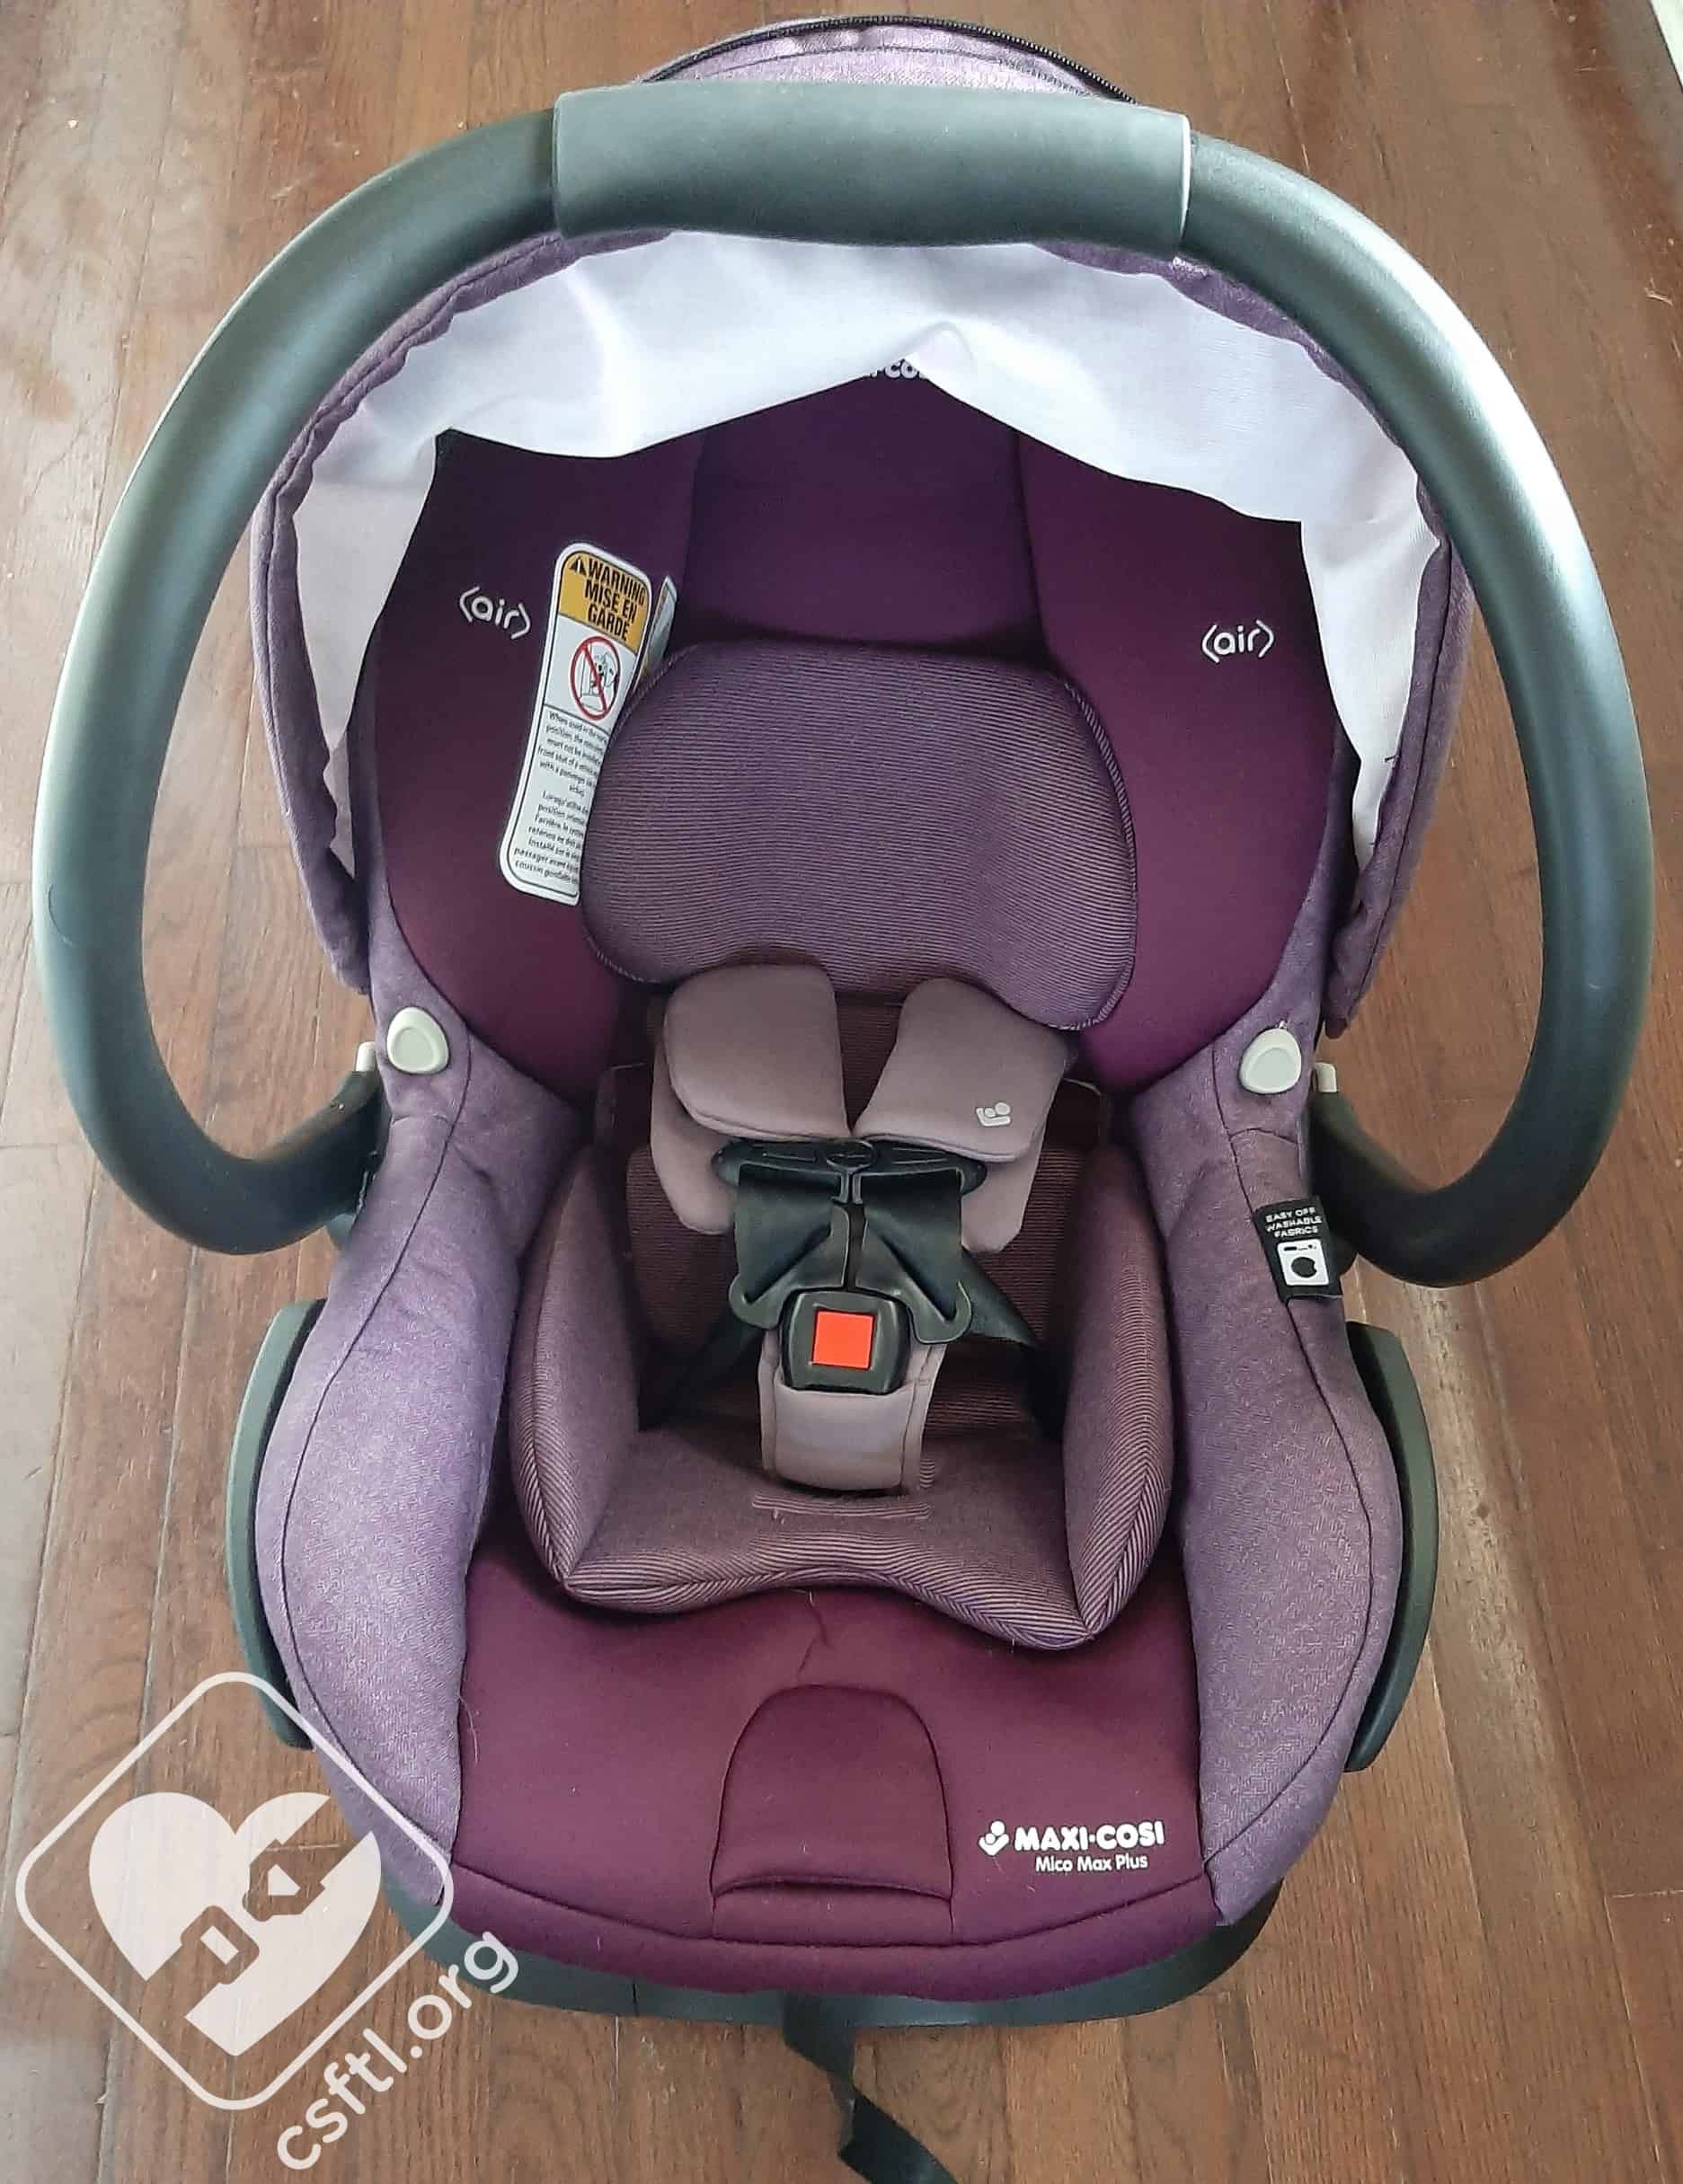 Maxi Cosi Mico Max Plus Review - Car Seats For The Littles